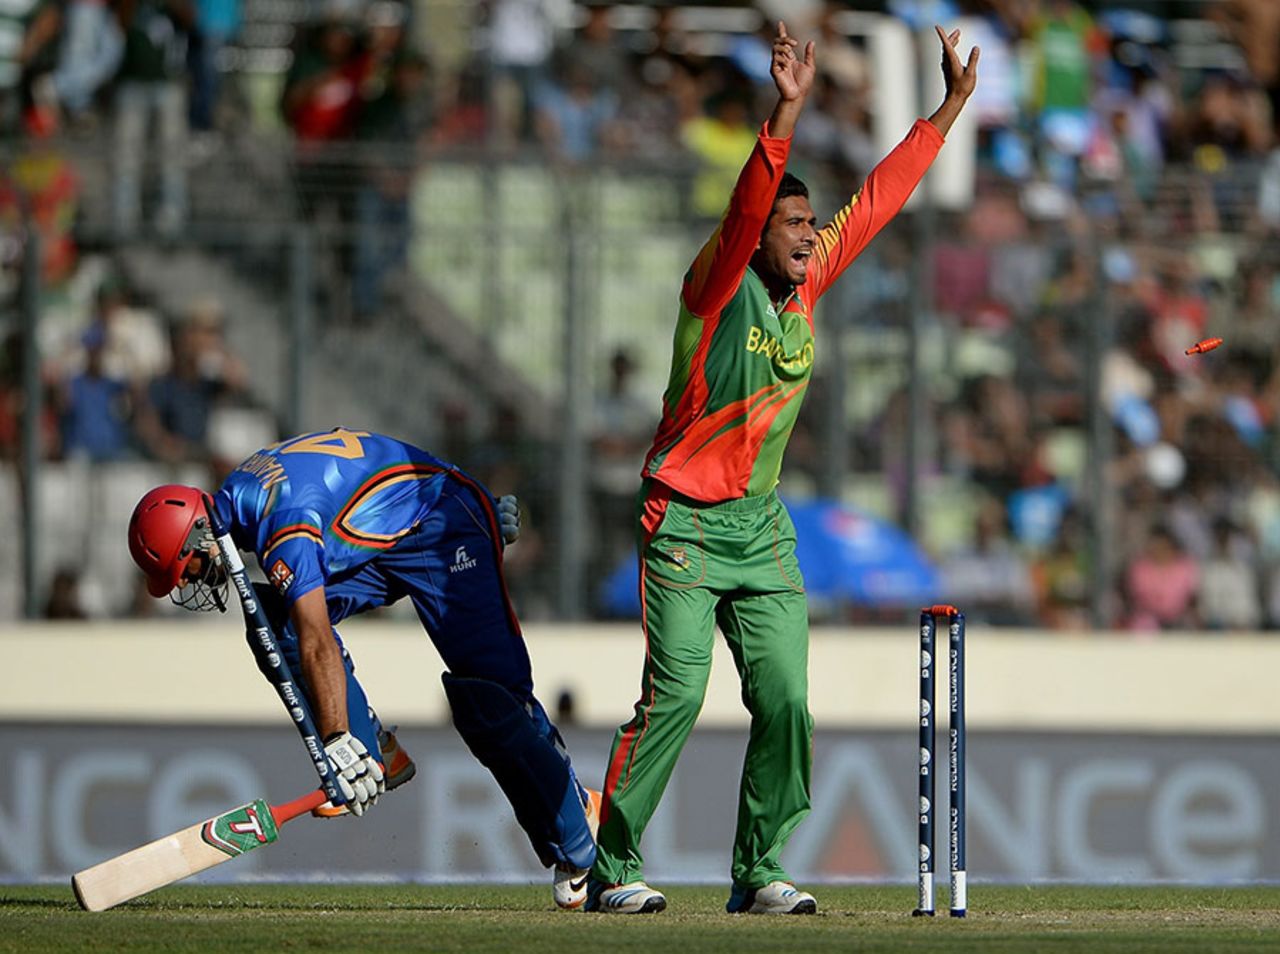 Mahmudullah celebrates as Nawroz Mangal is run out by a direct hit from Sabbir Rahman, Bangladesh v Afghanistan, World T20, Qualifying Group A, March 16, 2014